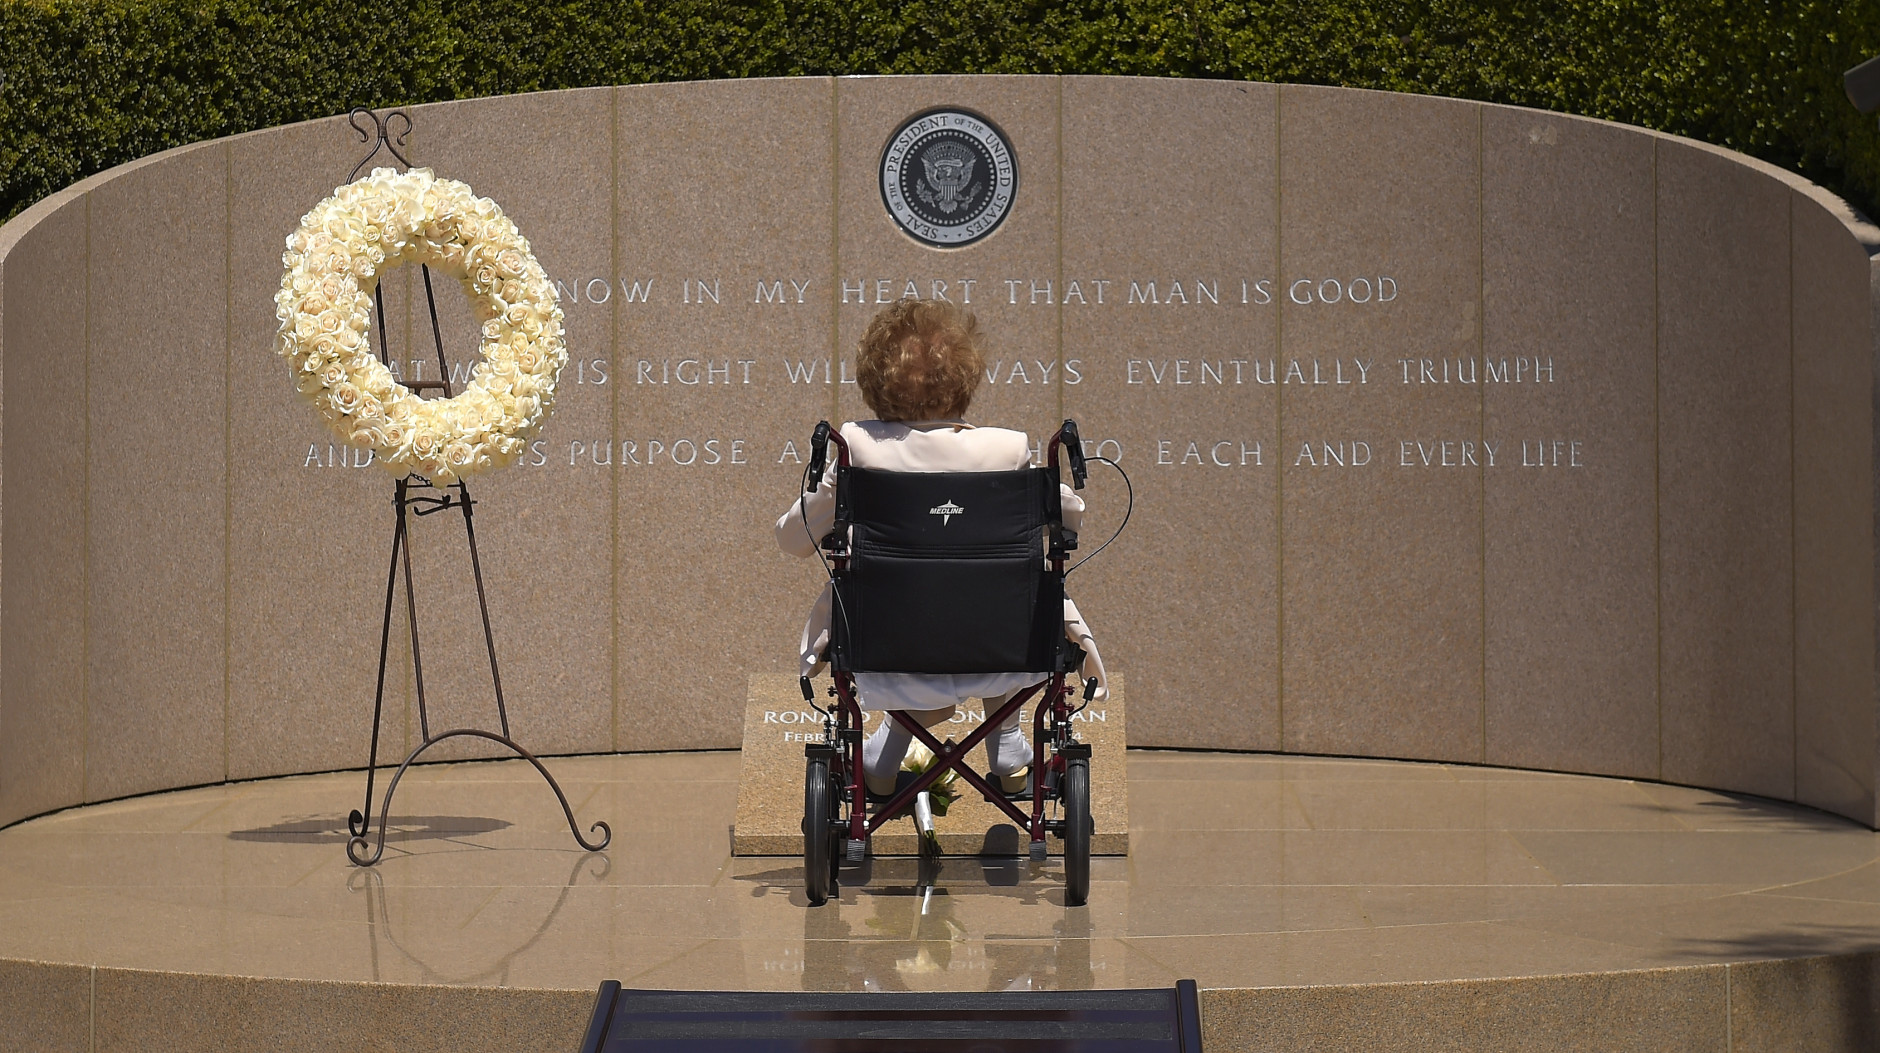 FOR USE AS DESIRED, YEAR END PHOTOS - FILE - Former first lady Nancy Reagan visits the grave site of her husband, President Ronald Reagan, at the Ronald Reagan Presidential Library, Thursday, June 5, 2014, in Simi Valley, Calif. (AP Photo/Mark J. Terrill, File)